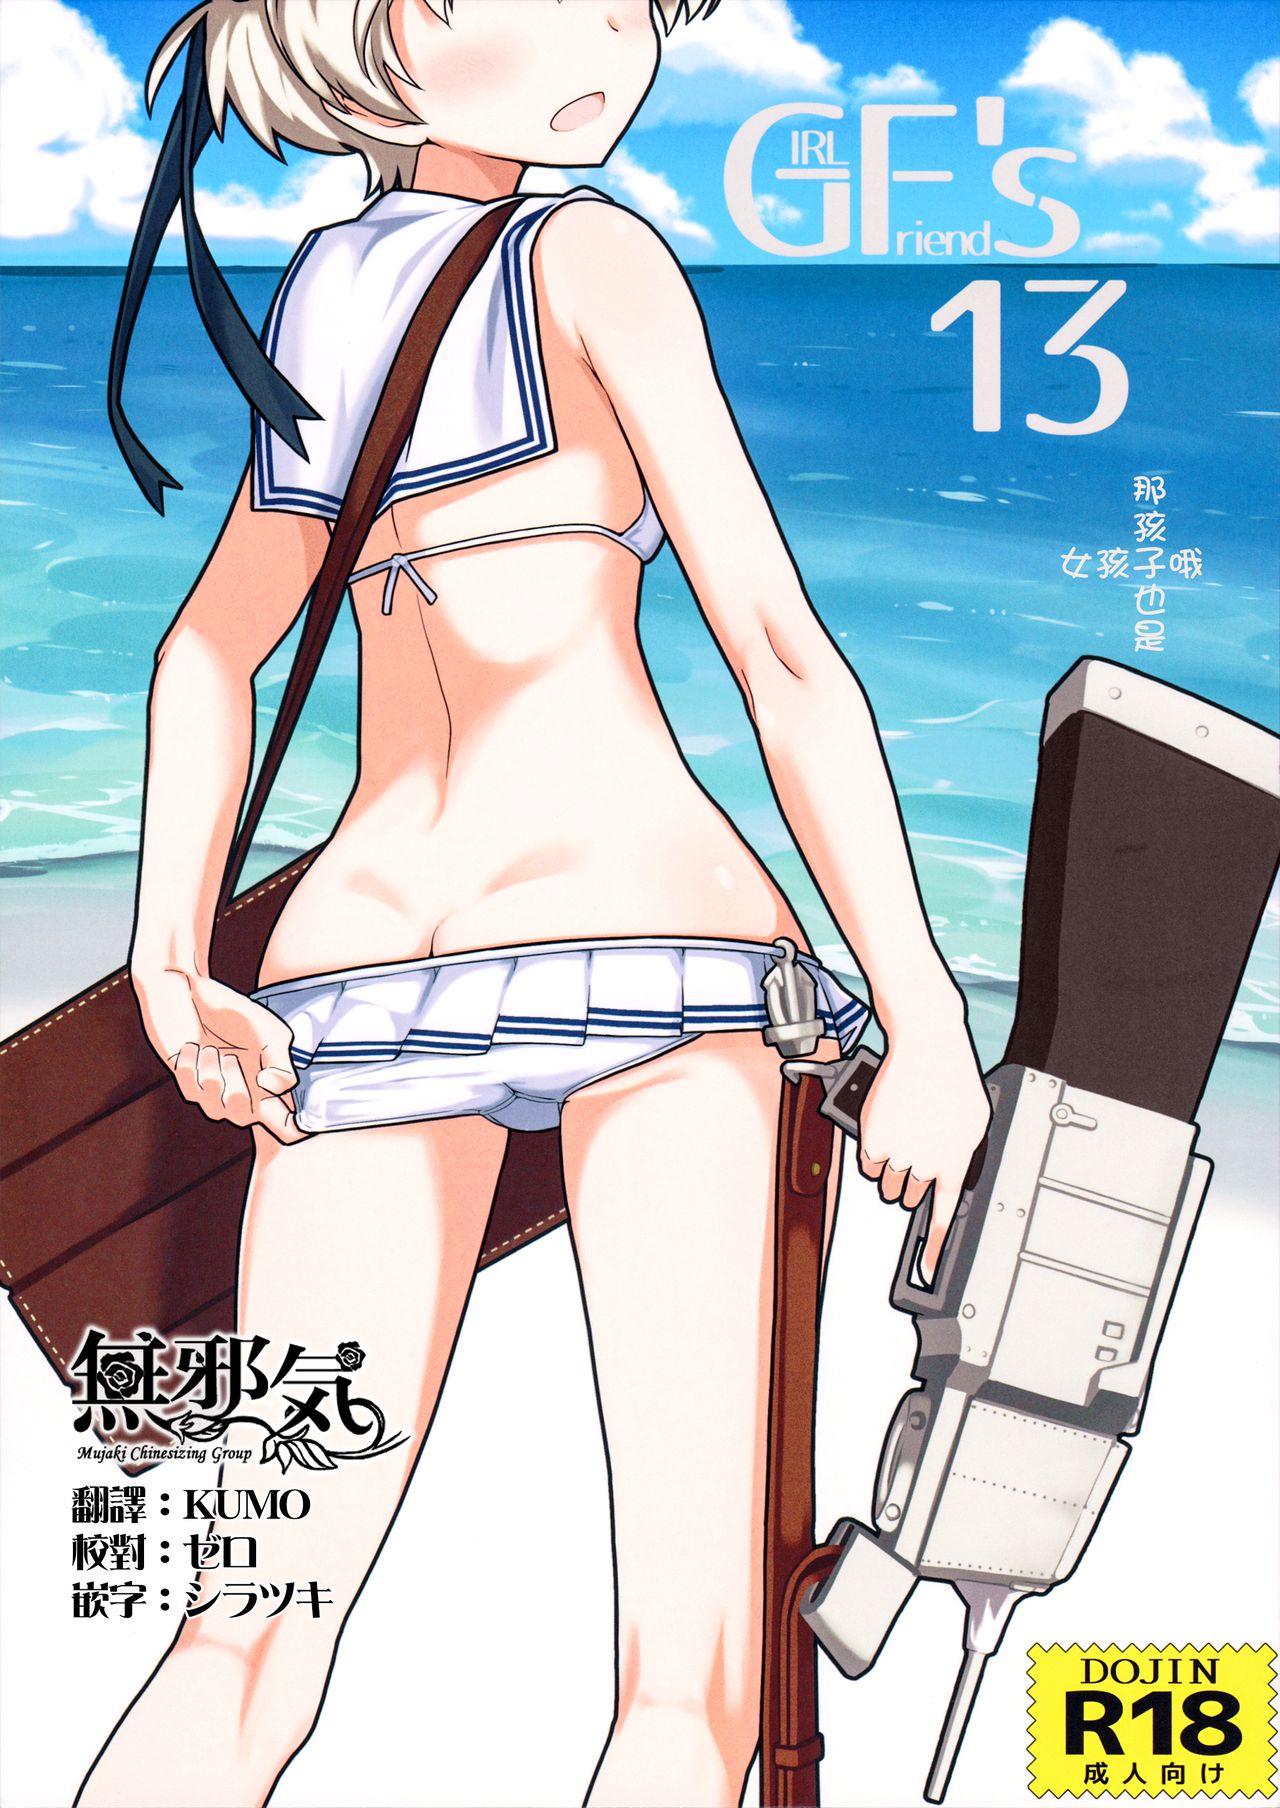 Blowjobs GIRLFriend's 13 - Kantai collection Free Blow Job - Page 1